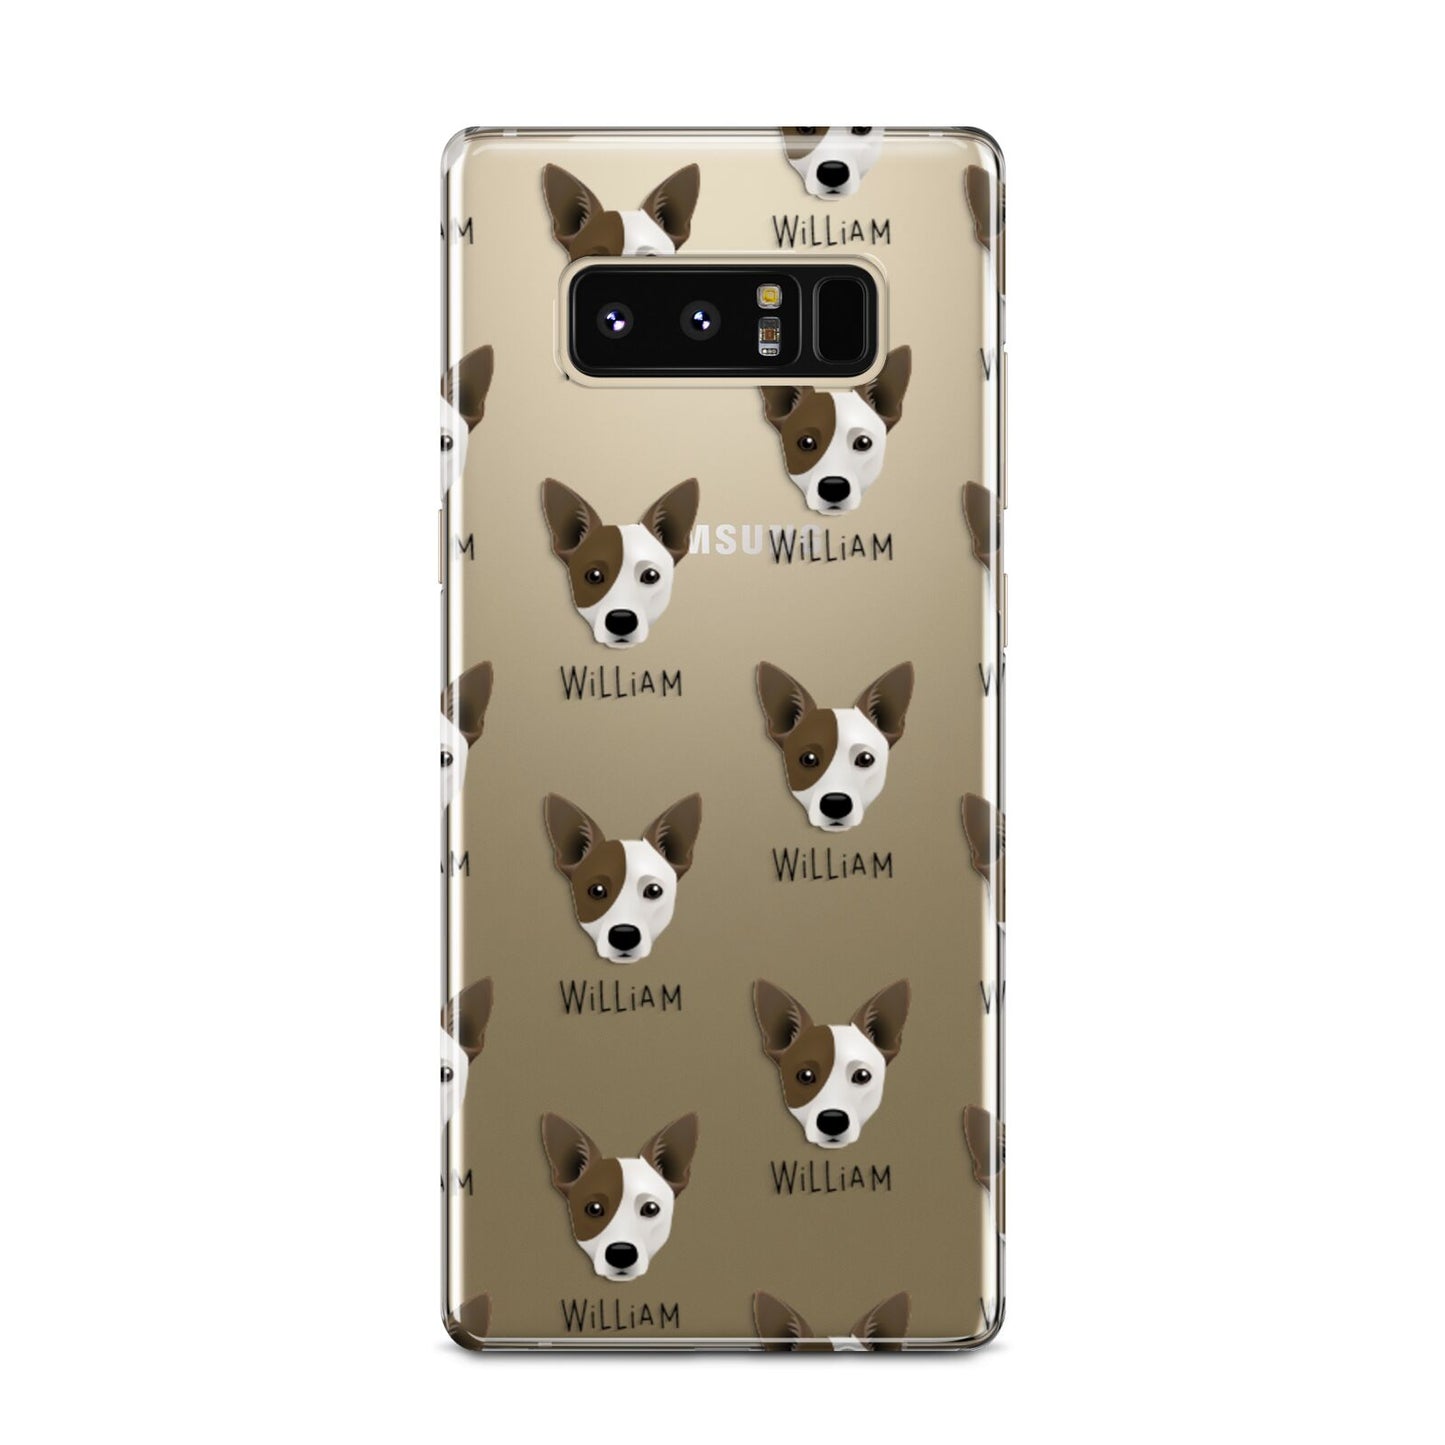 Cojack Icon with Name Samsung Galaxy Note 8 Case